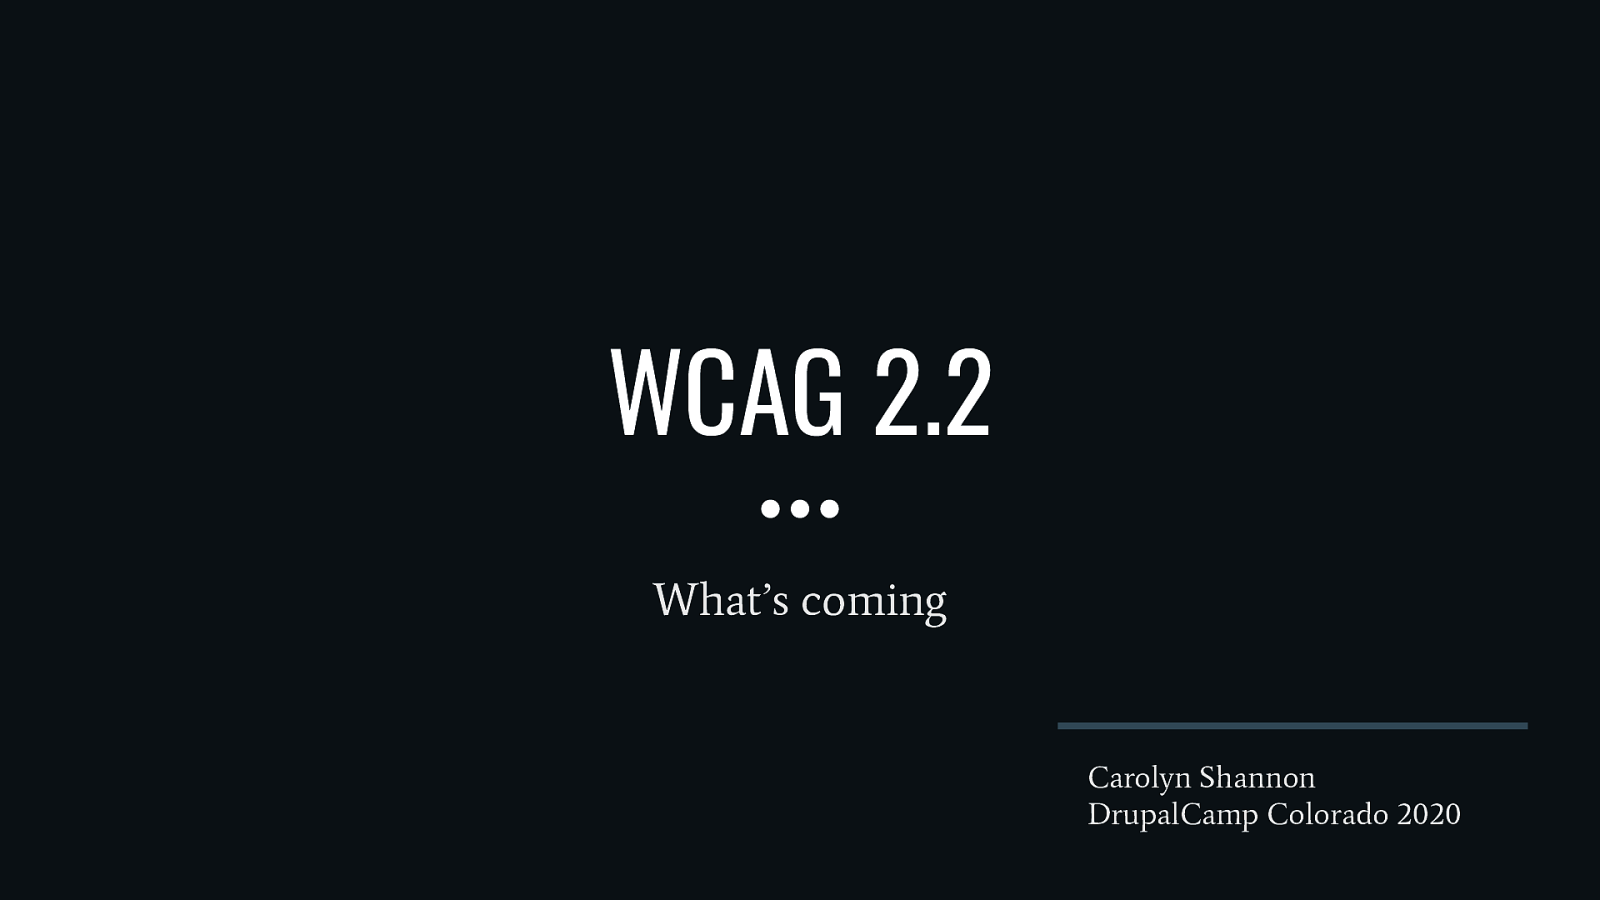 WCAG 2.2 What’s coming